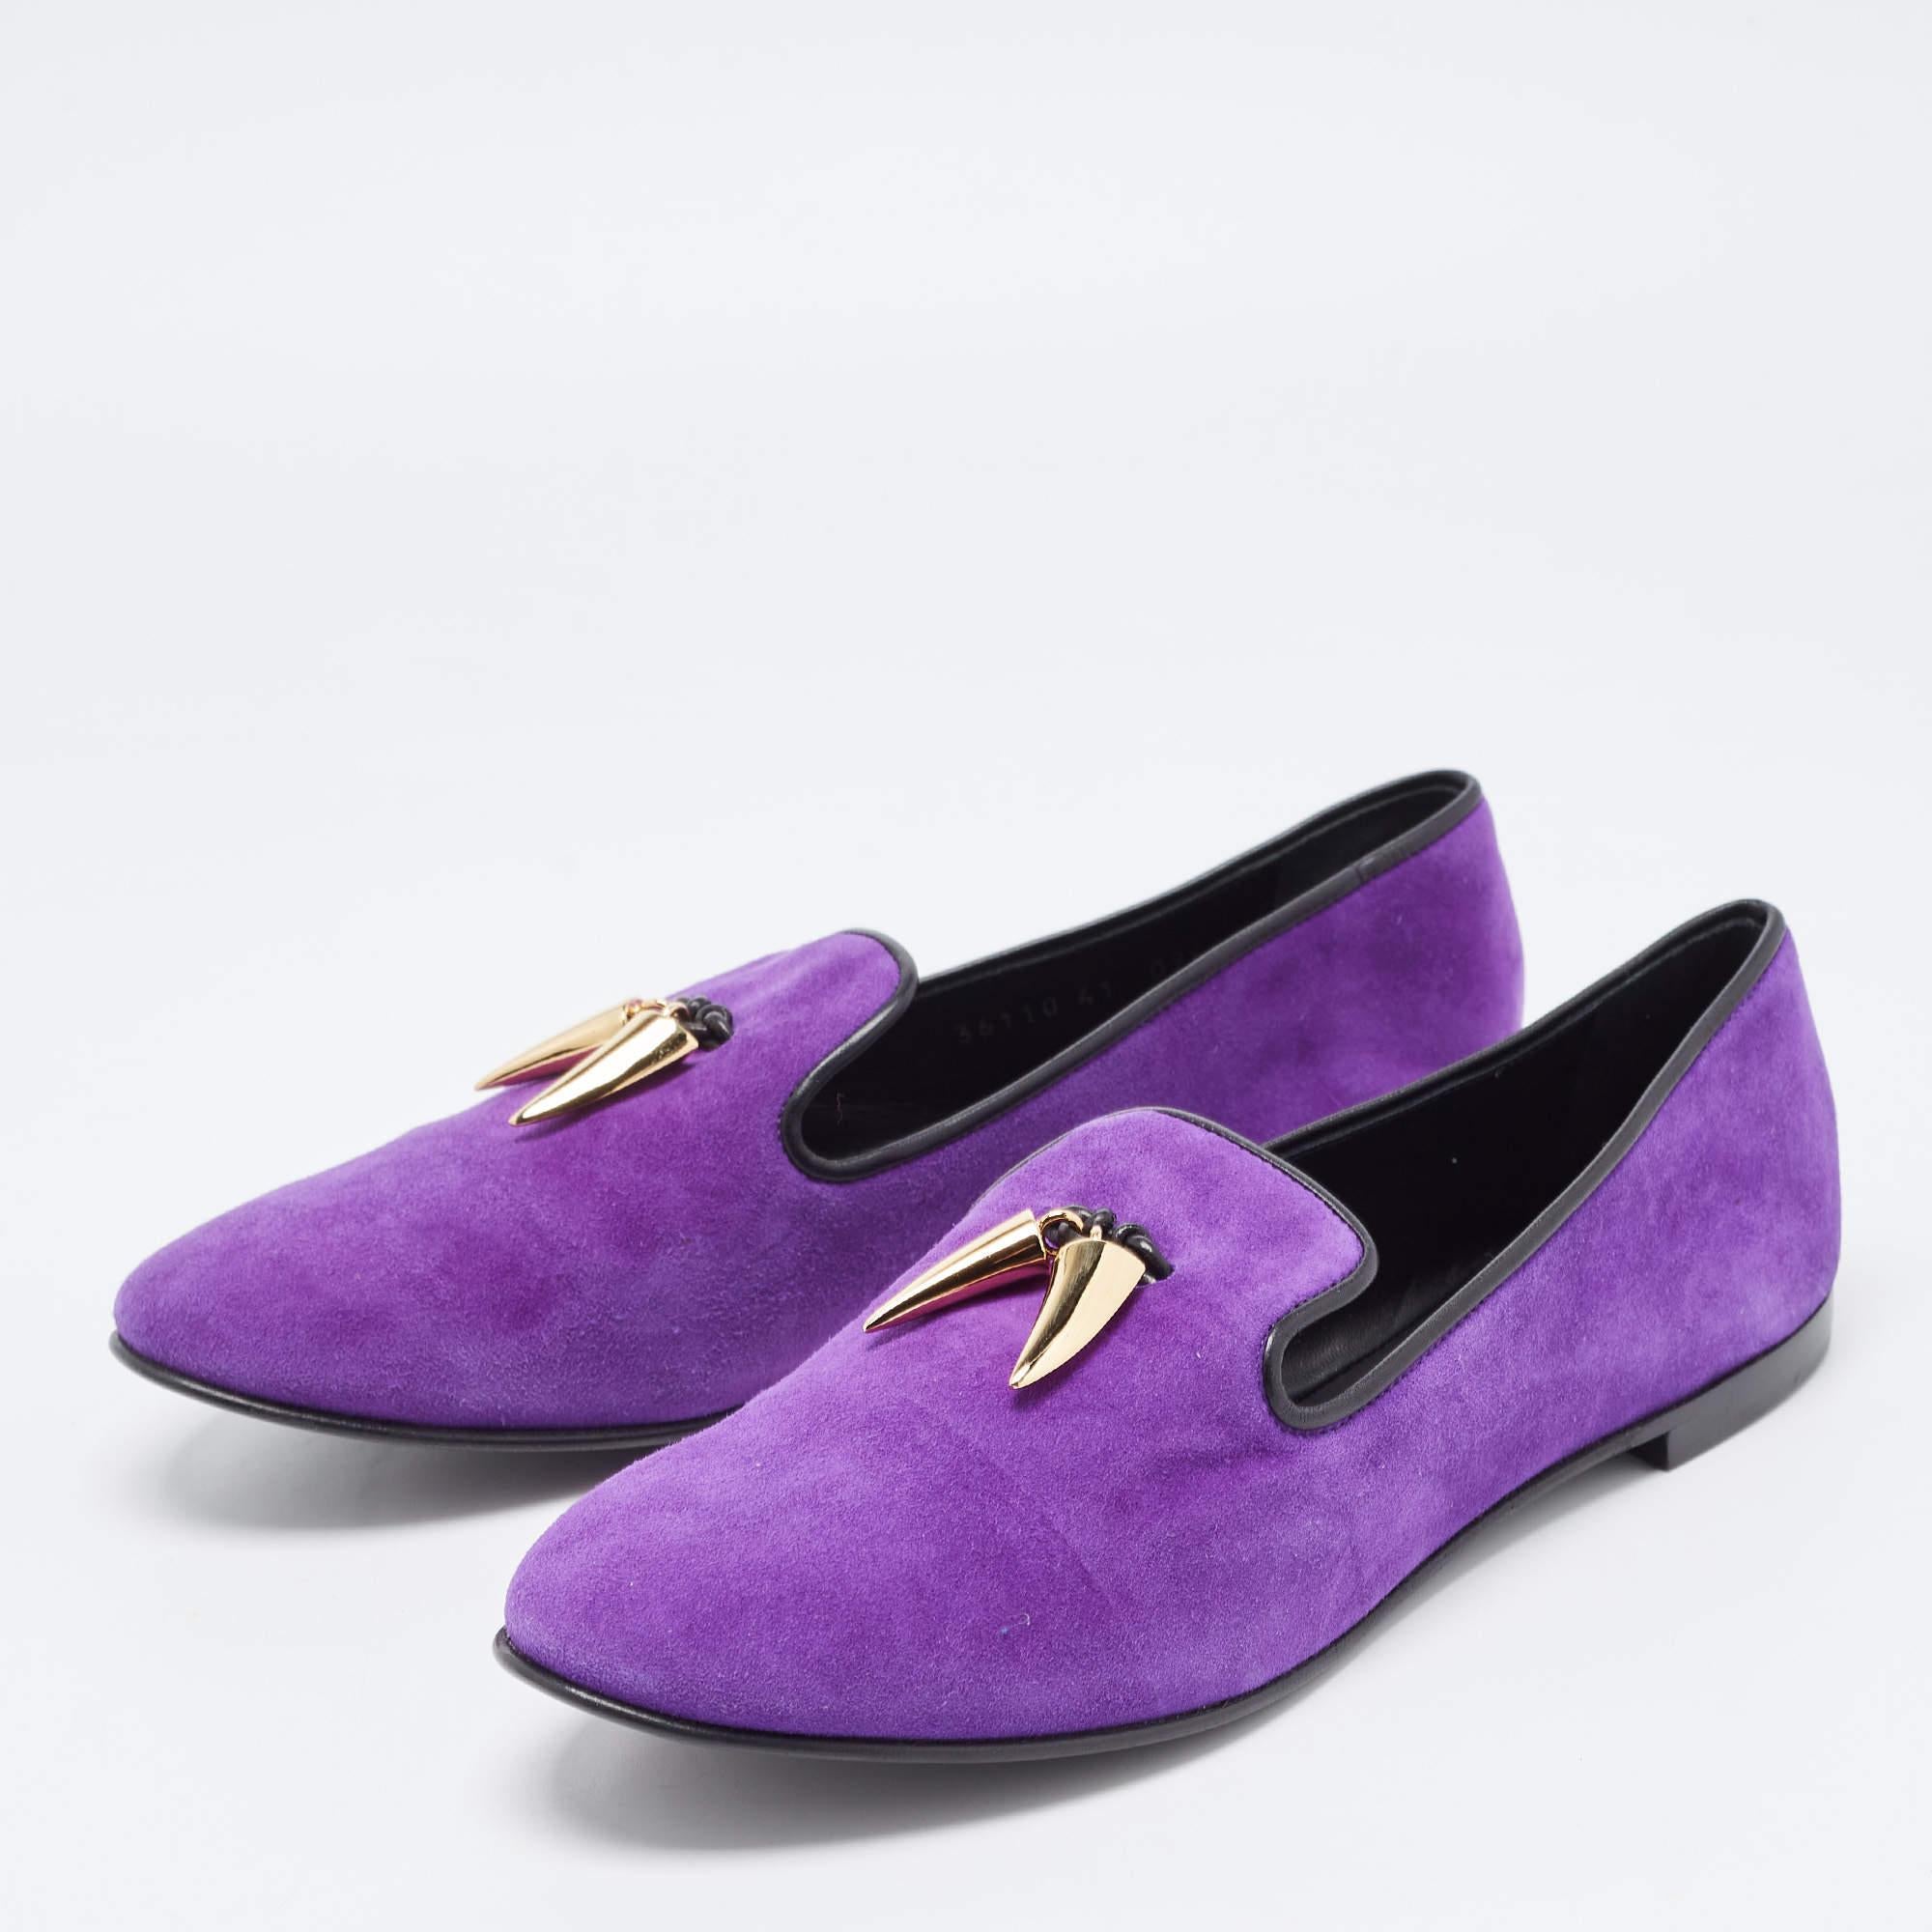 Give your outfit a luxe update with this pair of Giuseppe Zanotti smoking slippers. The shoes are sewn perfectly to help you make a statement in them for a long time.

